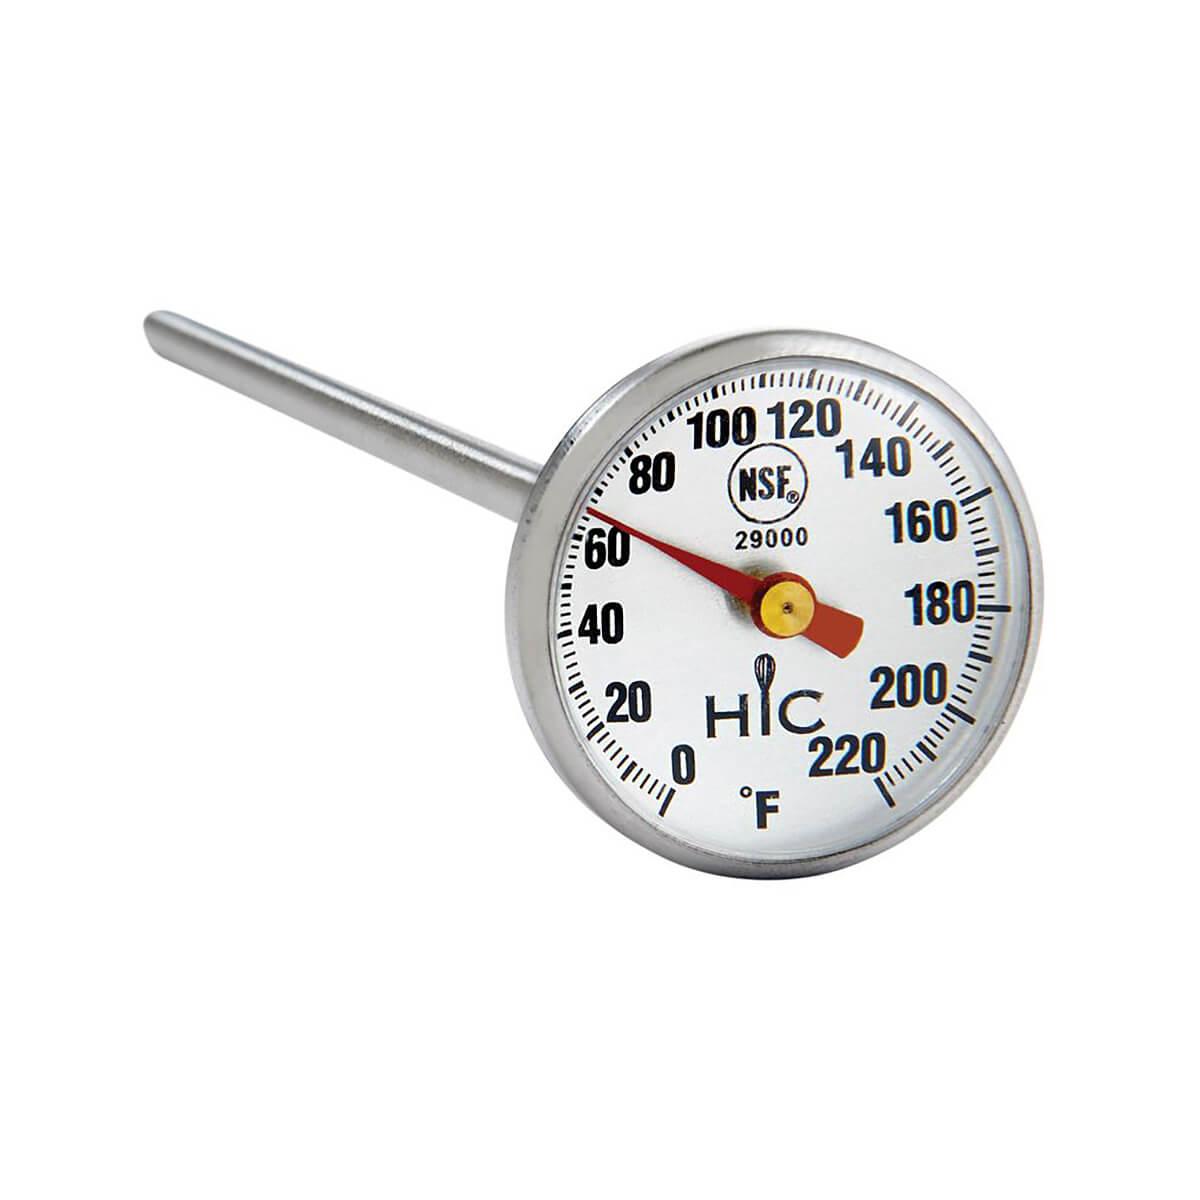 HIC Large Face Oven Thermometer